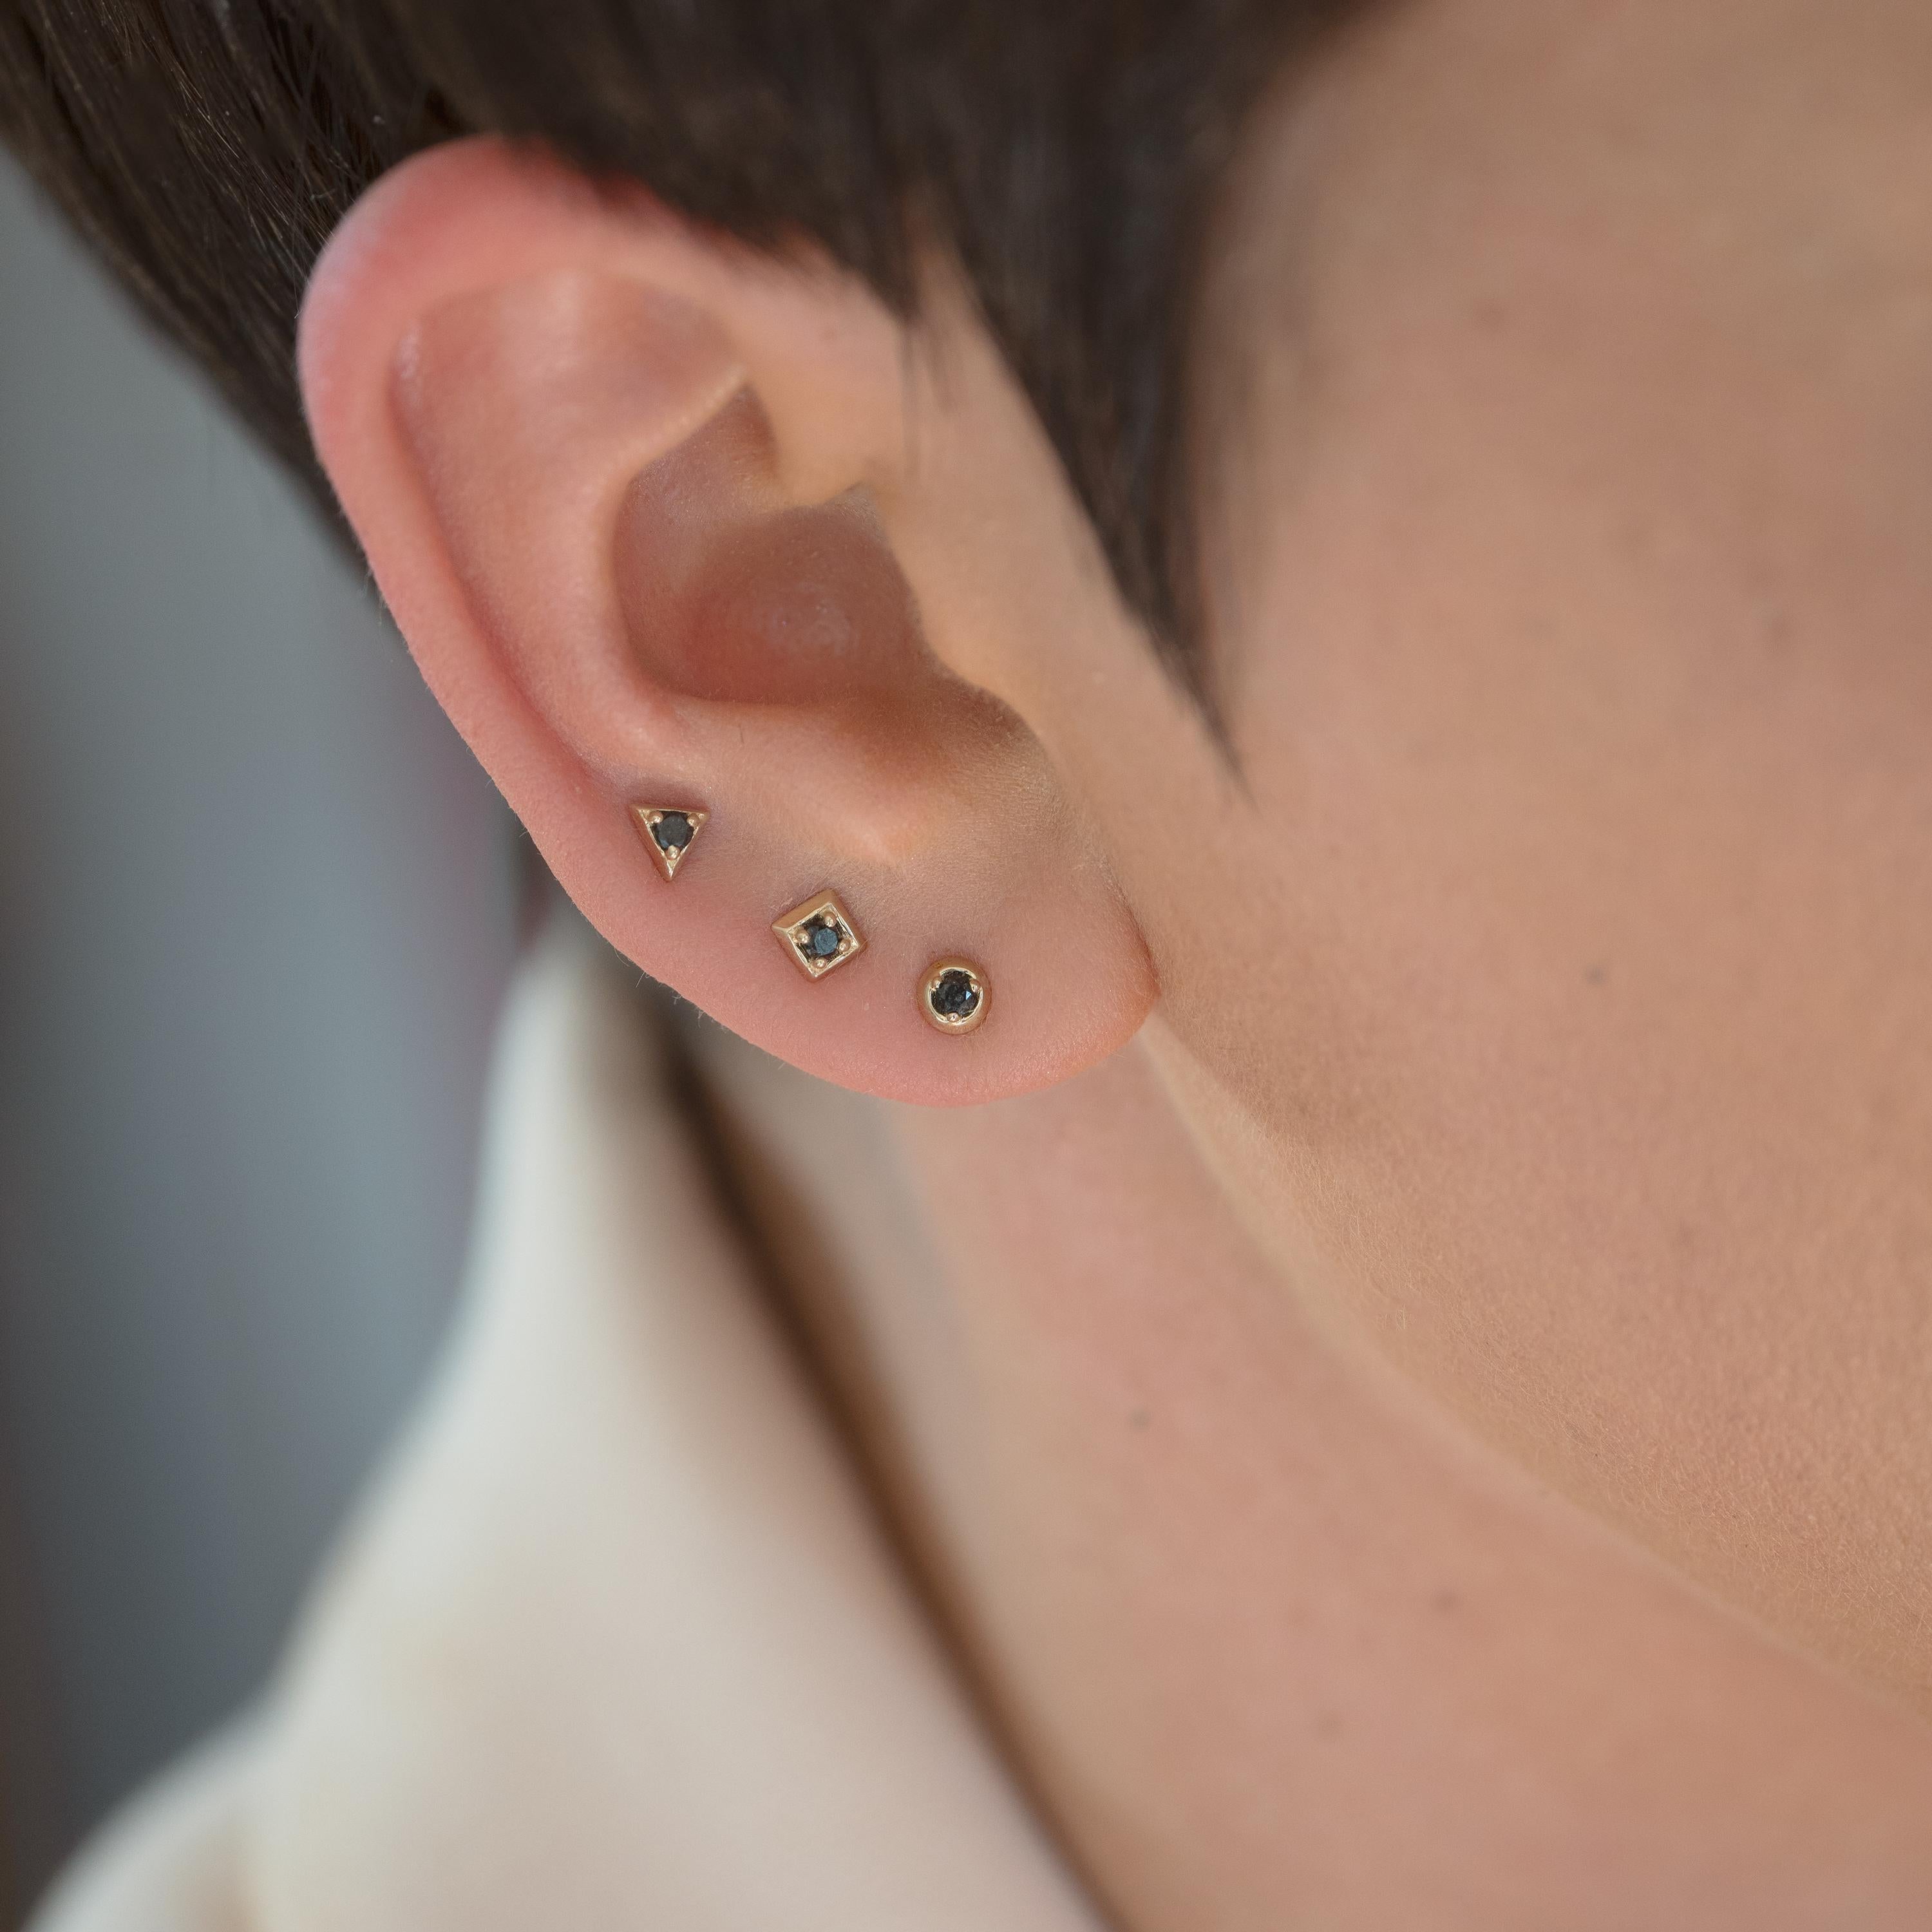 Sometimes the best things in life are the accents, the small gestures and textural pieces that add intentionality to our days. These Mini Formation Studs can pair well with larger earrings or stand well alone. The ethically mined black diamond is